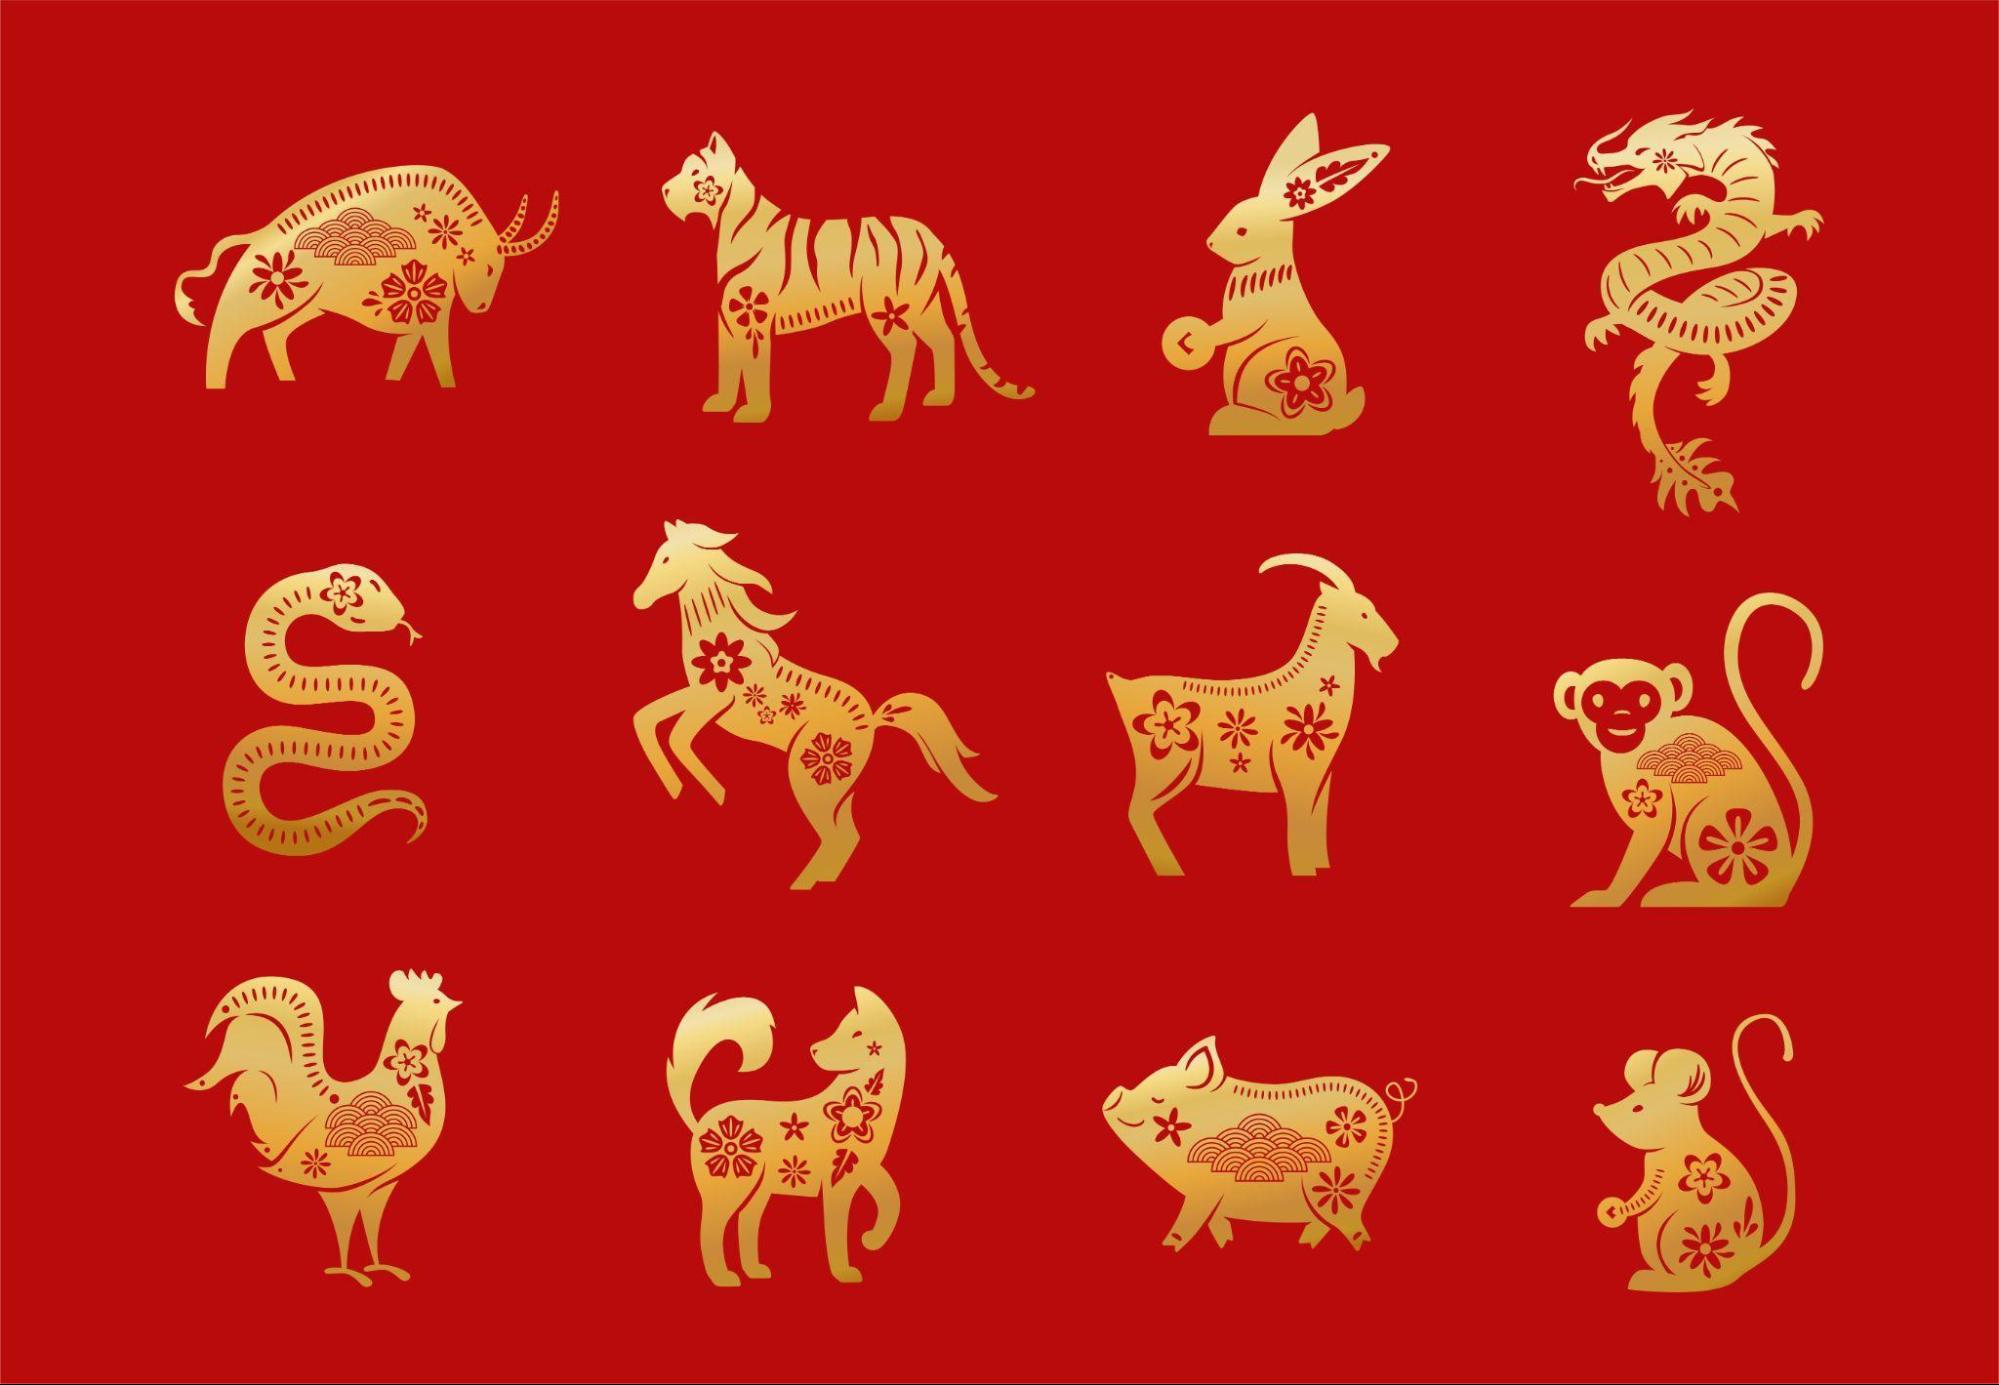 Reading Someone's Personality Based on Chinese Zodiac Signs: Is it Accurate?